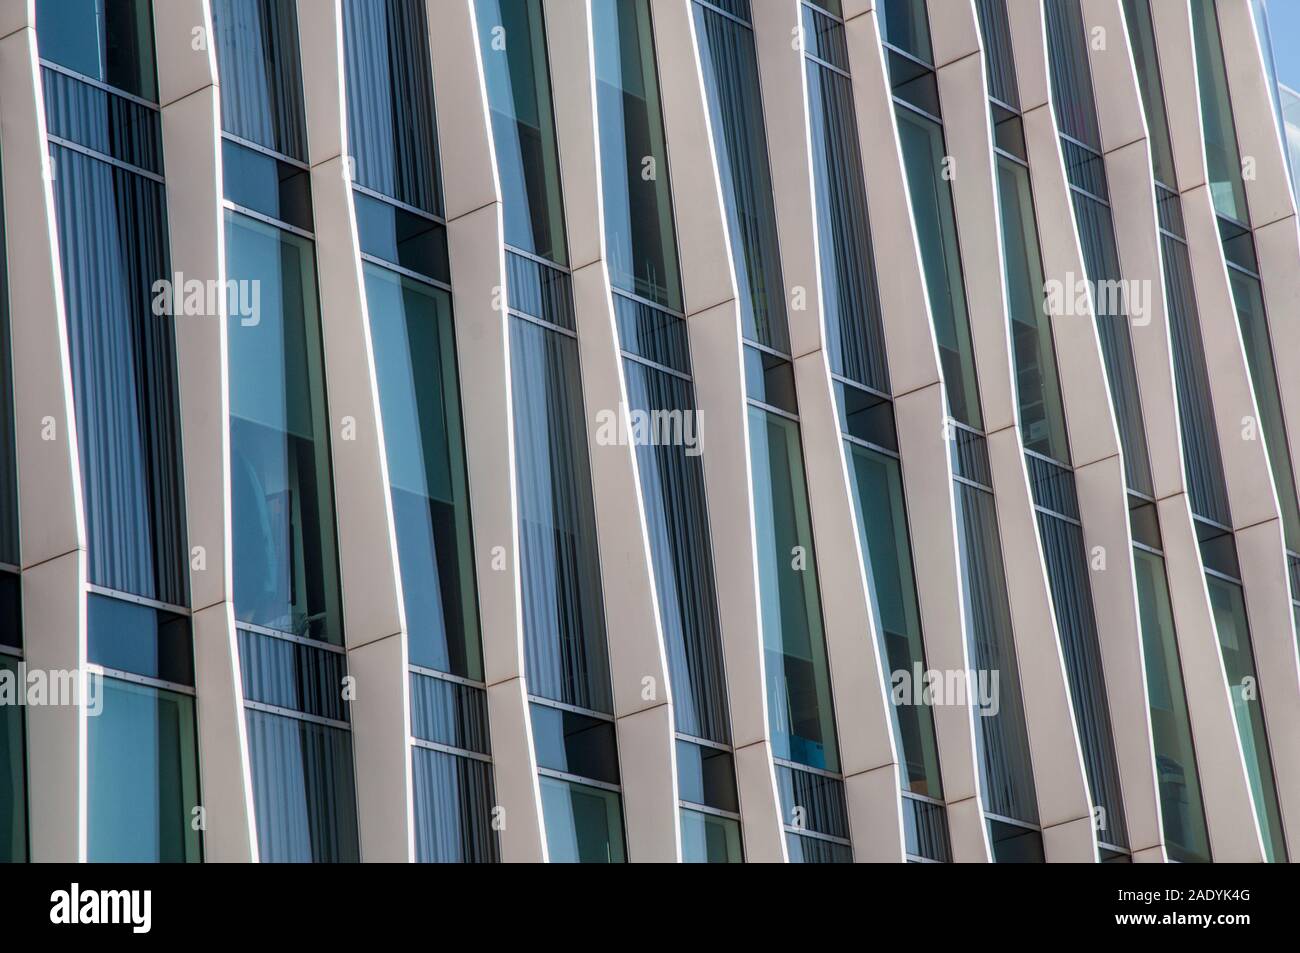 A modern glass structure with abstract design of municipal office block to house various departments for Blackpool Borough Council. Stock Photo